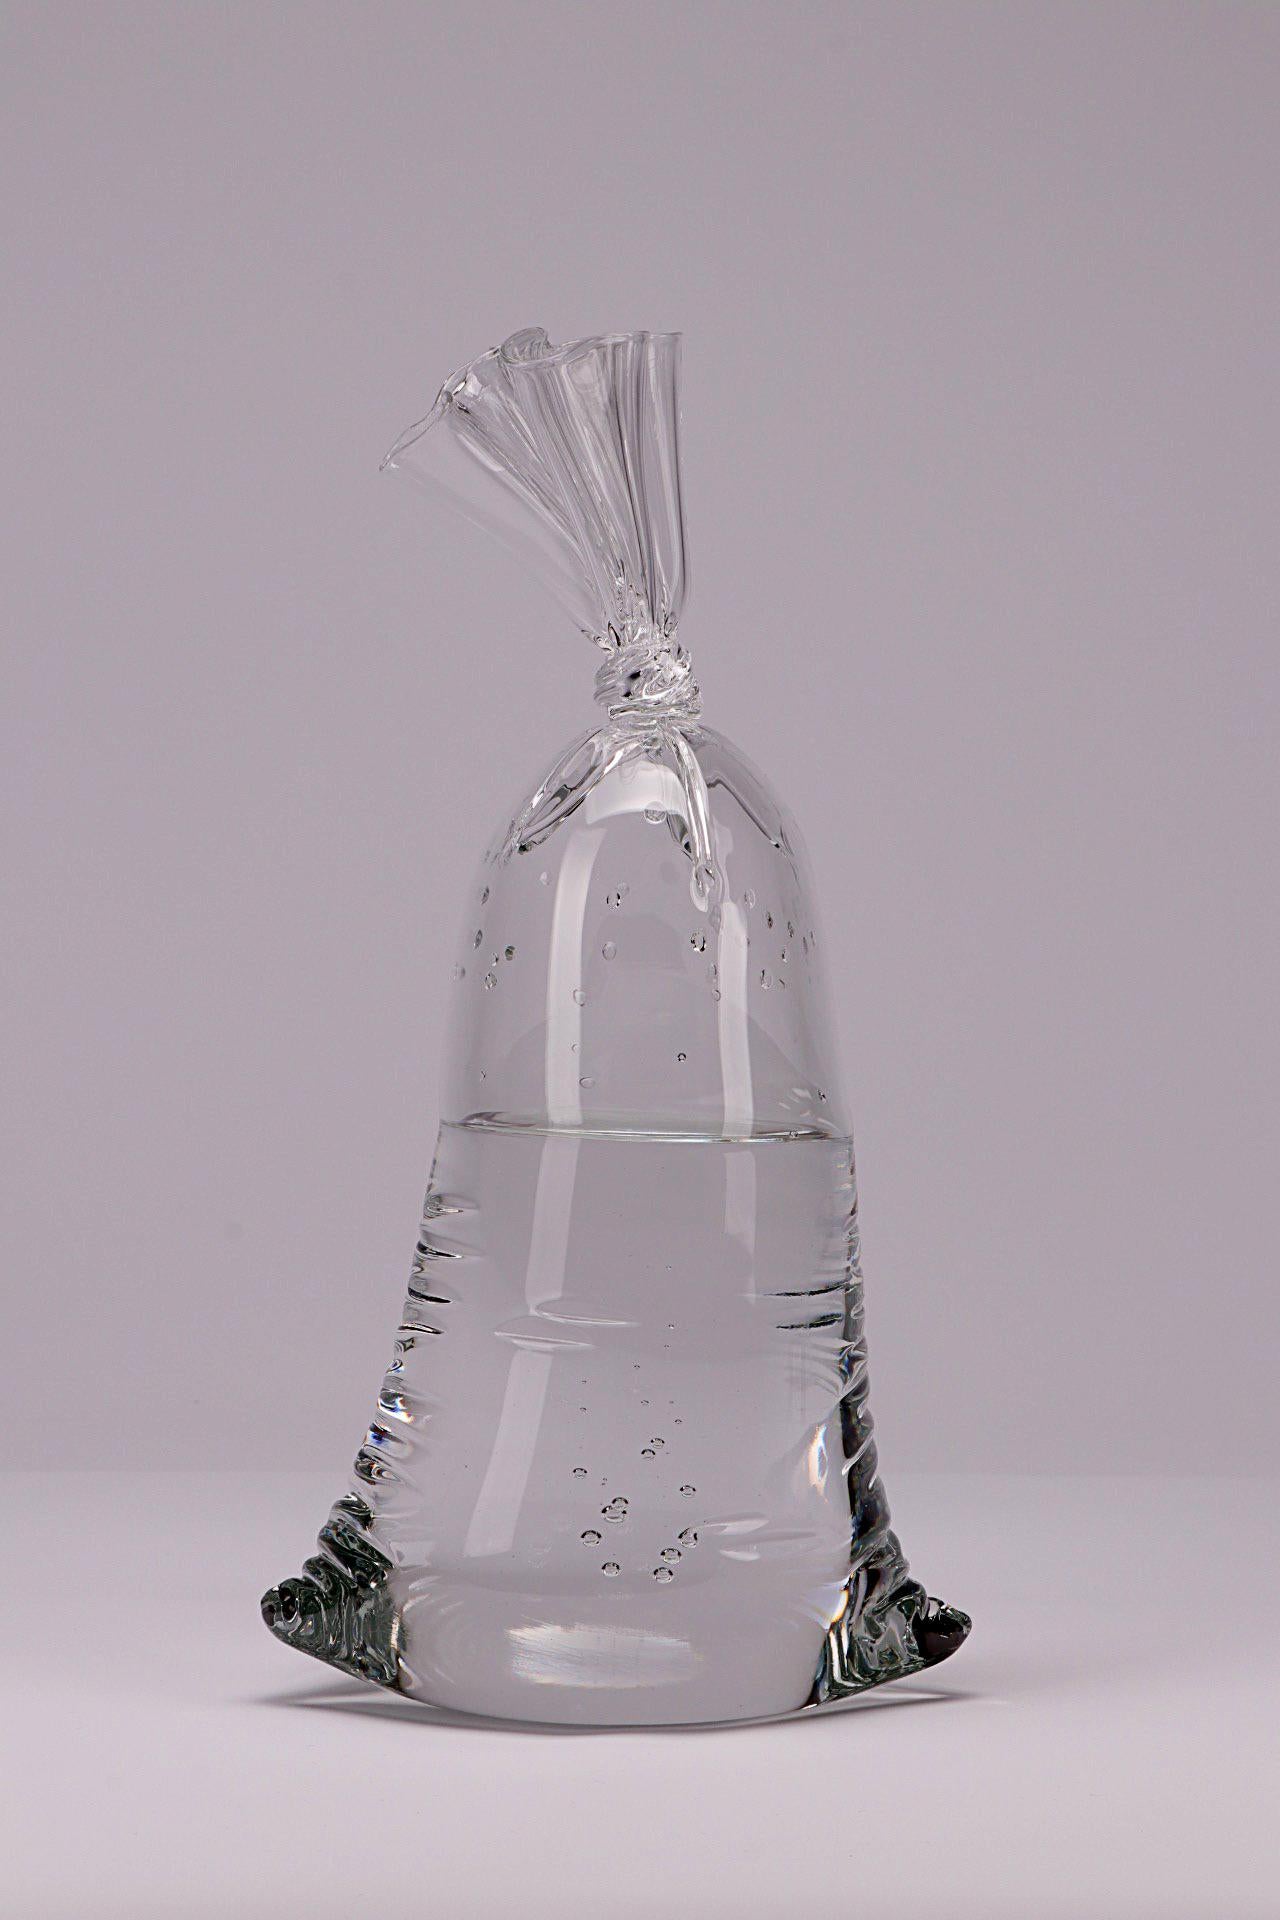 Glass Water Bag #19158 - Sculpture by Dylan Martinez